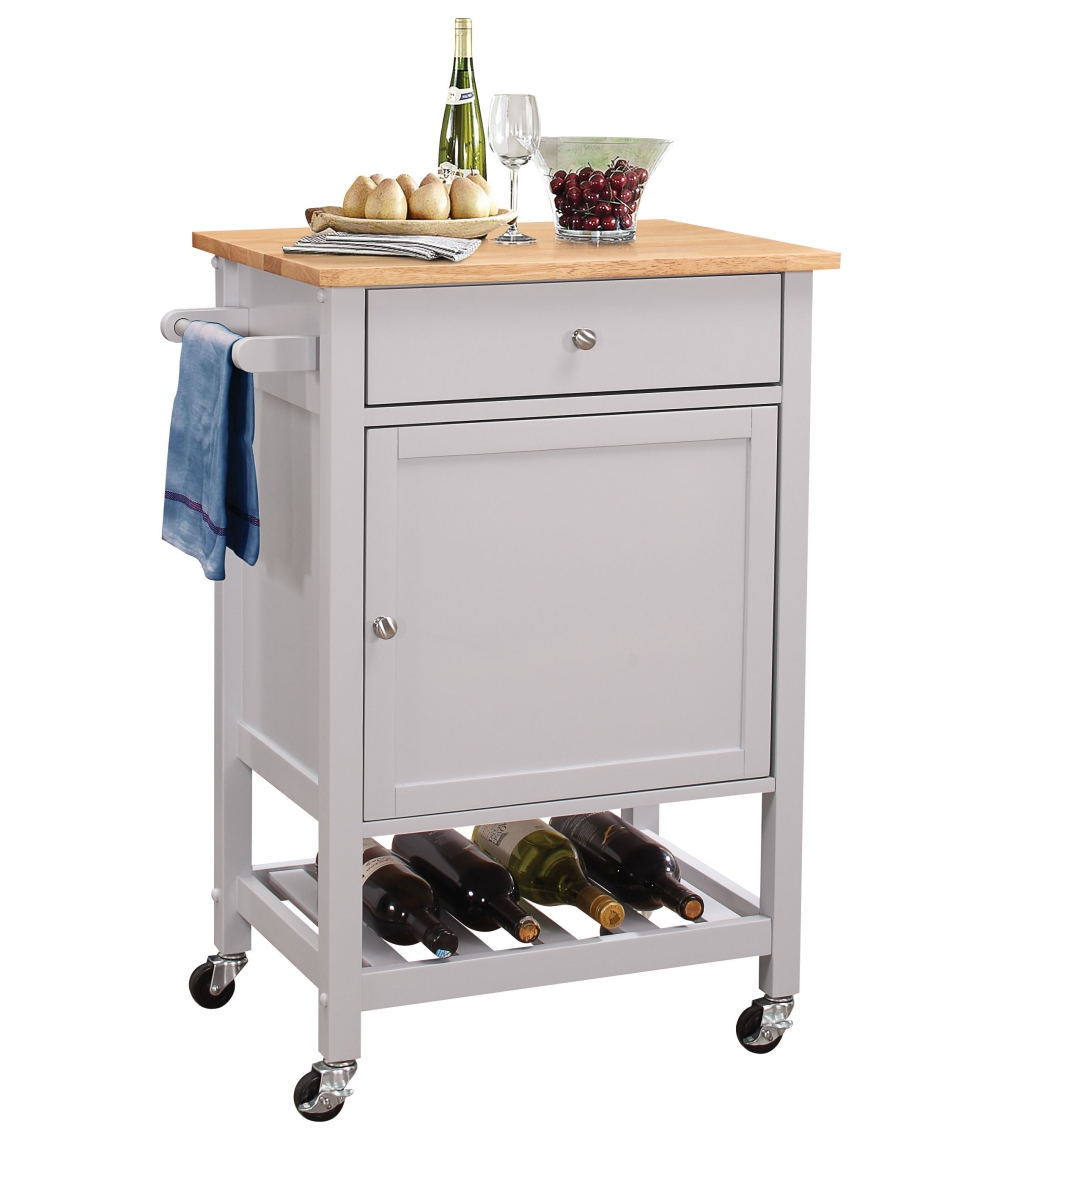 286670 34 X 25 X 17 In. Mdf Natural & Gray Kitchen Cart